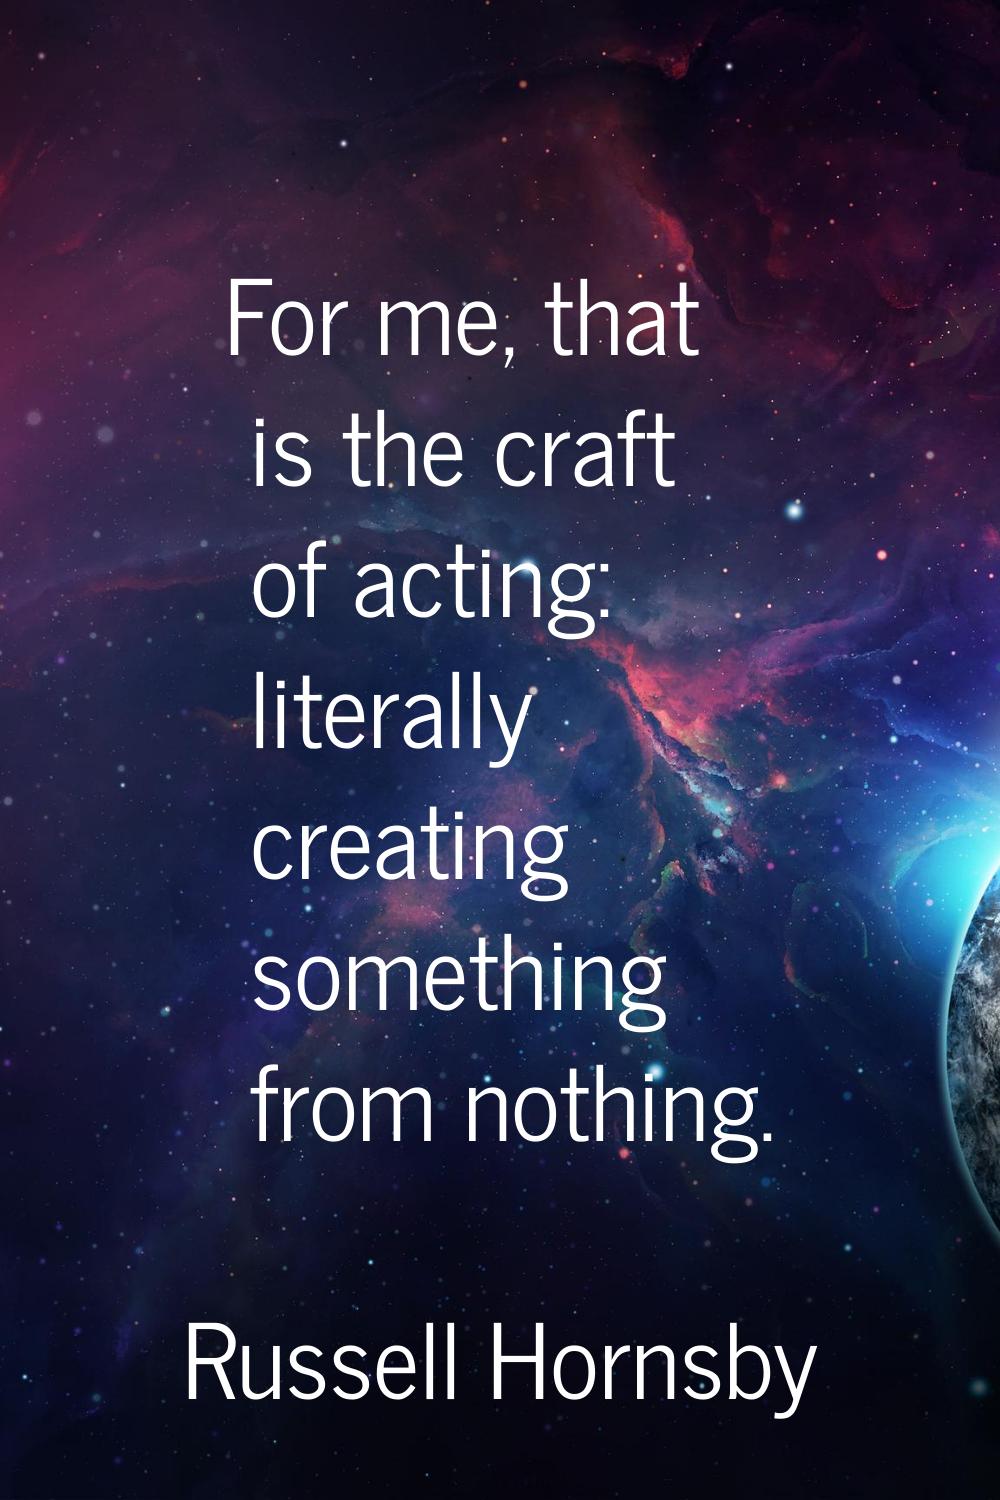 For me, that is the craft of acting: literally creating something from nothing.